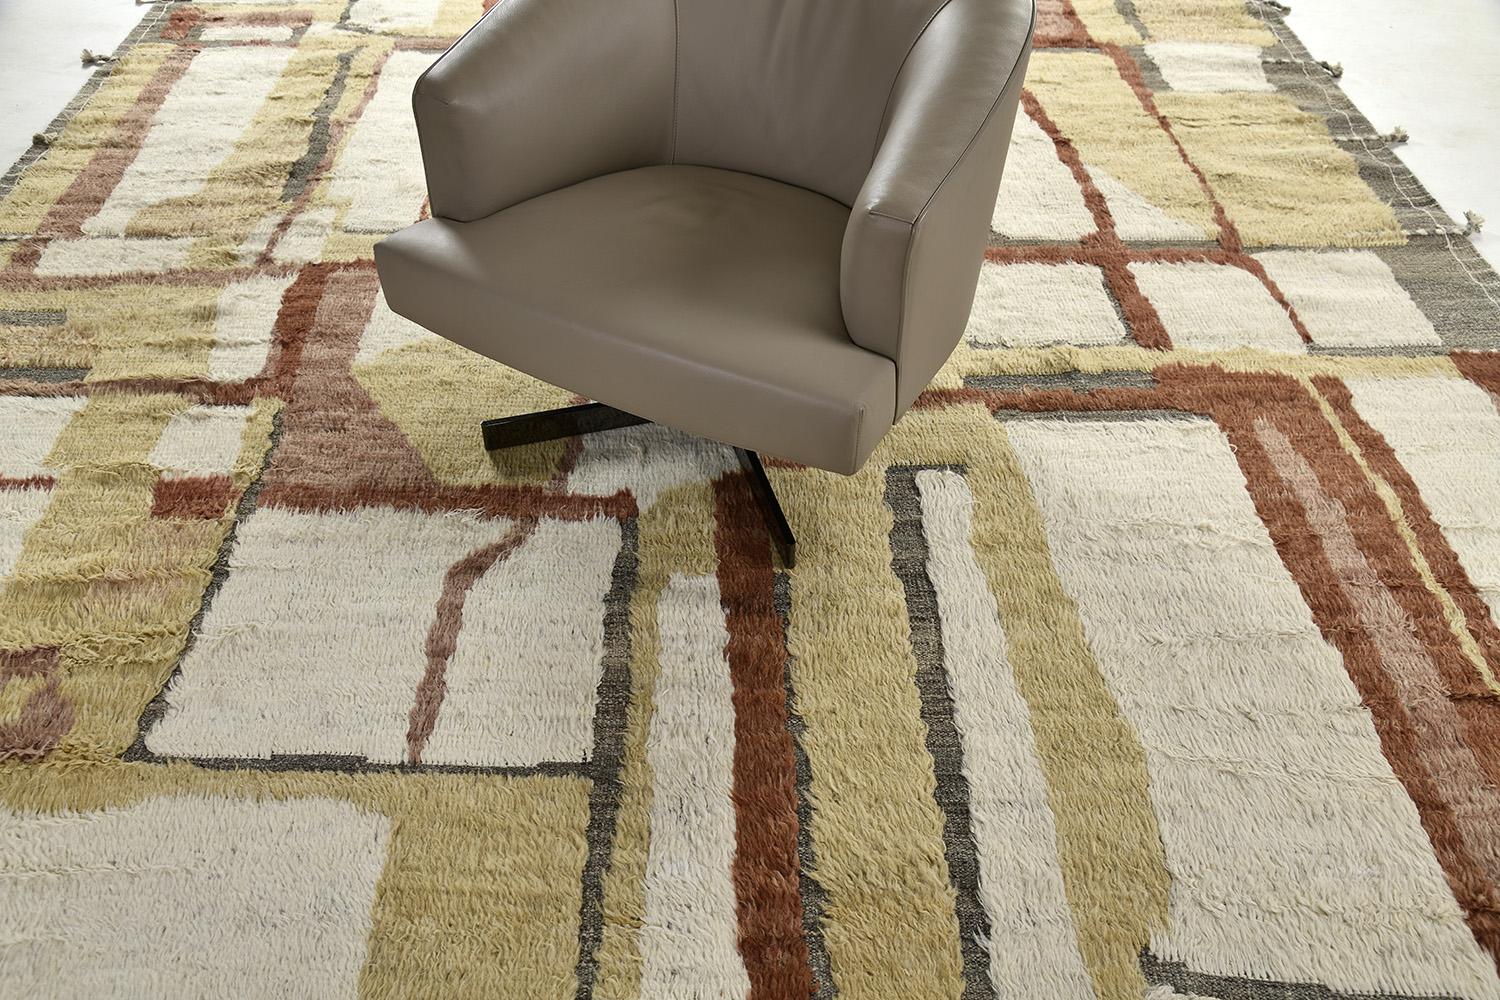 'Aziza' is a warm and lustrous wool rug with a unique play of colors and irregular shapes. This pile weave has embossed textures and unique tassel detailing which makes this piece highly sought after. Mehraban's Atlas collection is noted for their